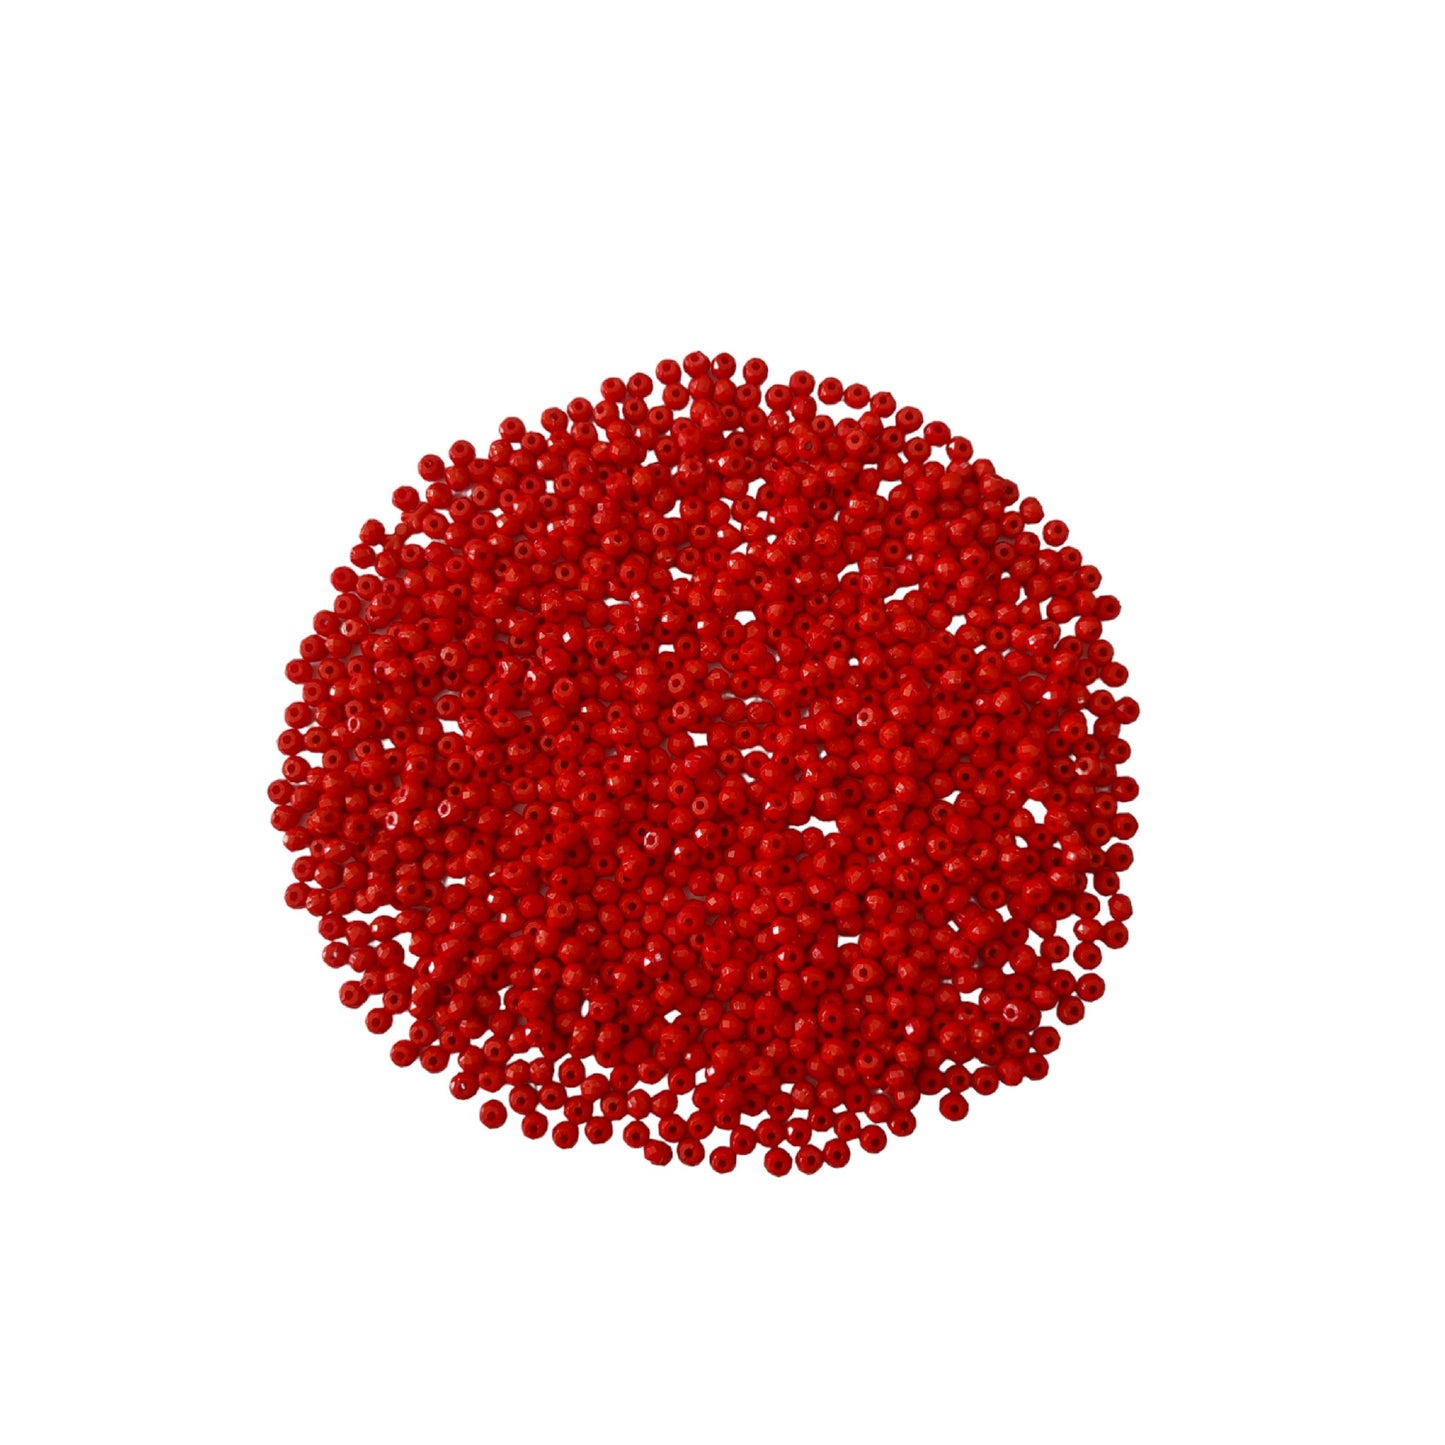 Indian Petals - Tyre shape ABS Colored Beads Ideal for Jewelry designing Craft or Decor Tyre shape ABS Colored Beads Ideal for Jewelry designing Craft or Decor - 8mm / Red / 100 Grams